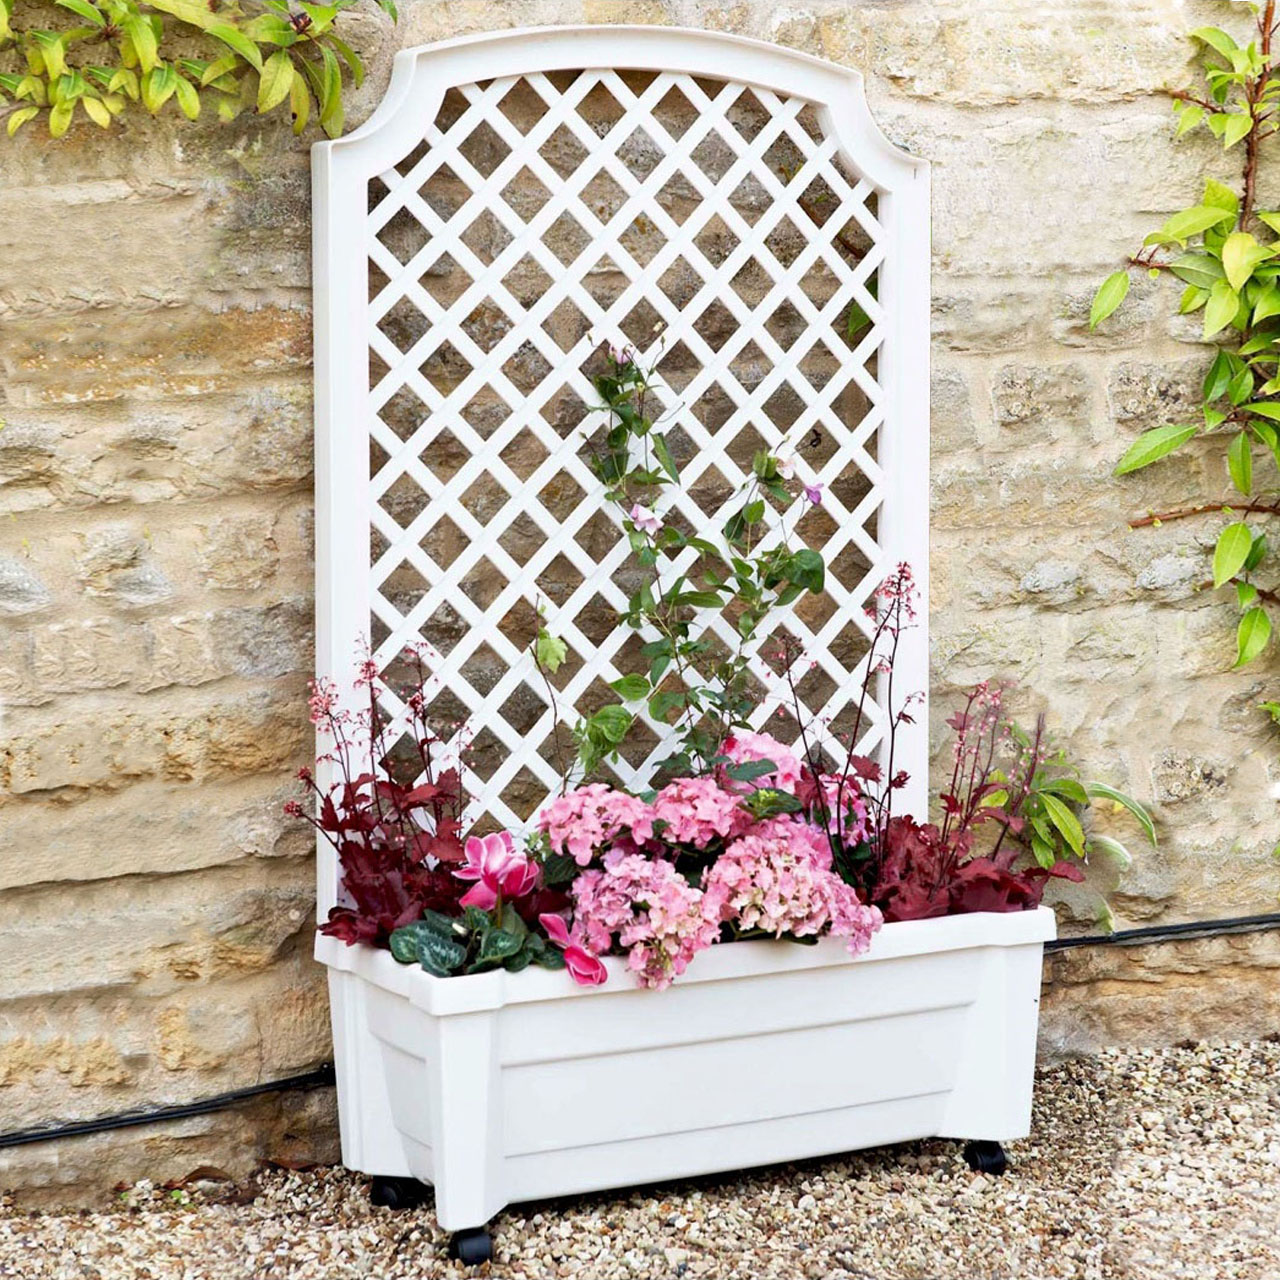 Self Watering Planter with Trellis on Wheels